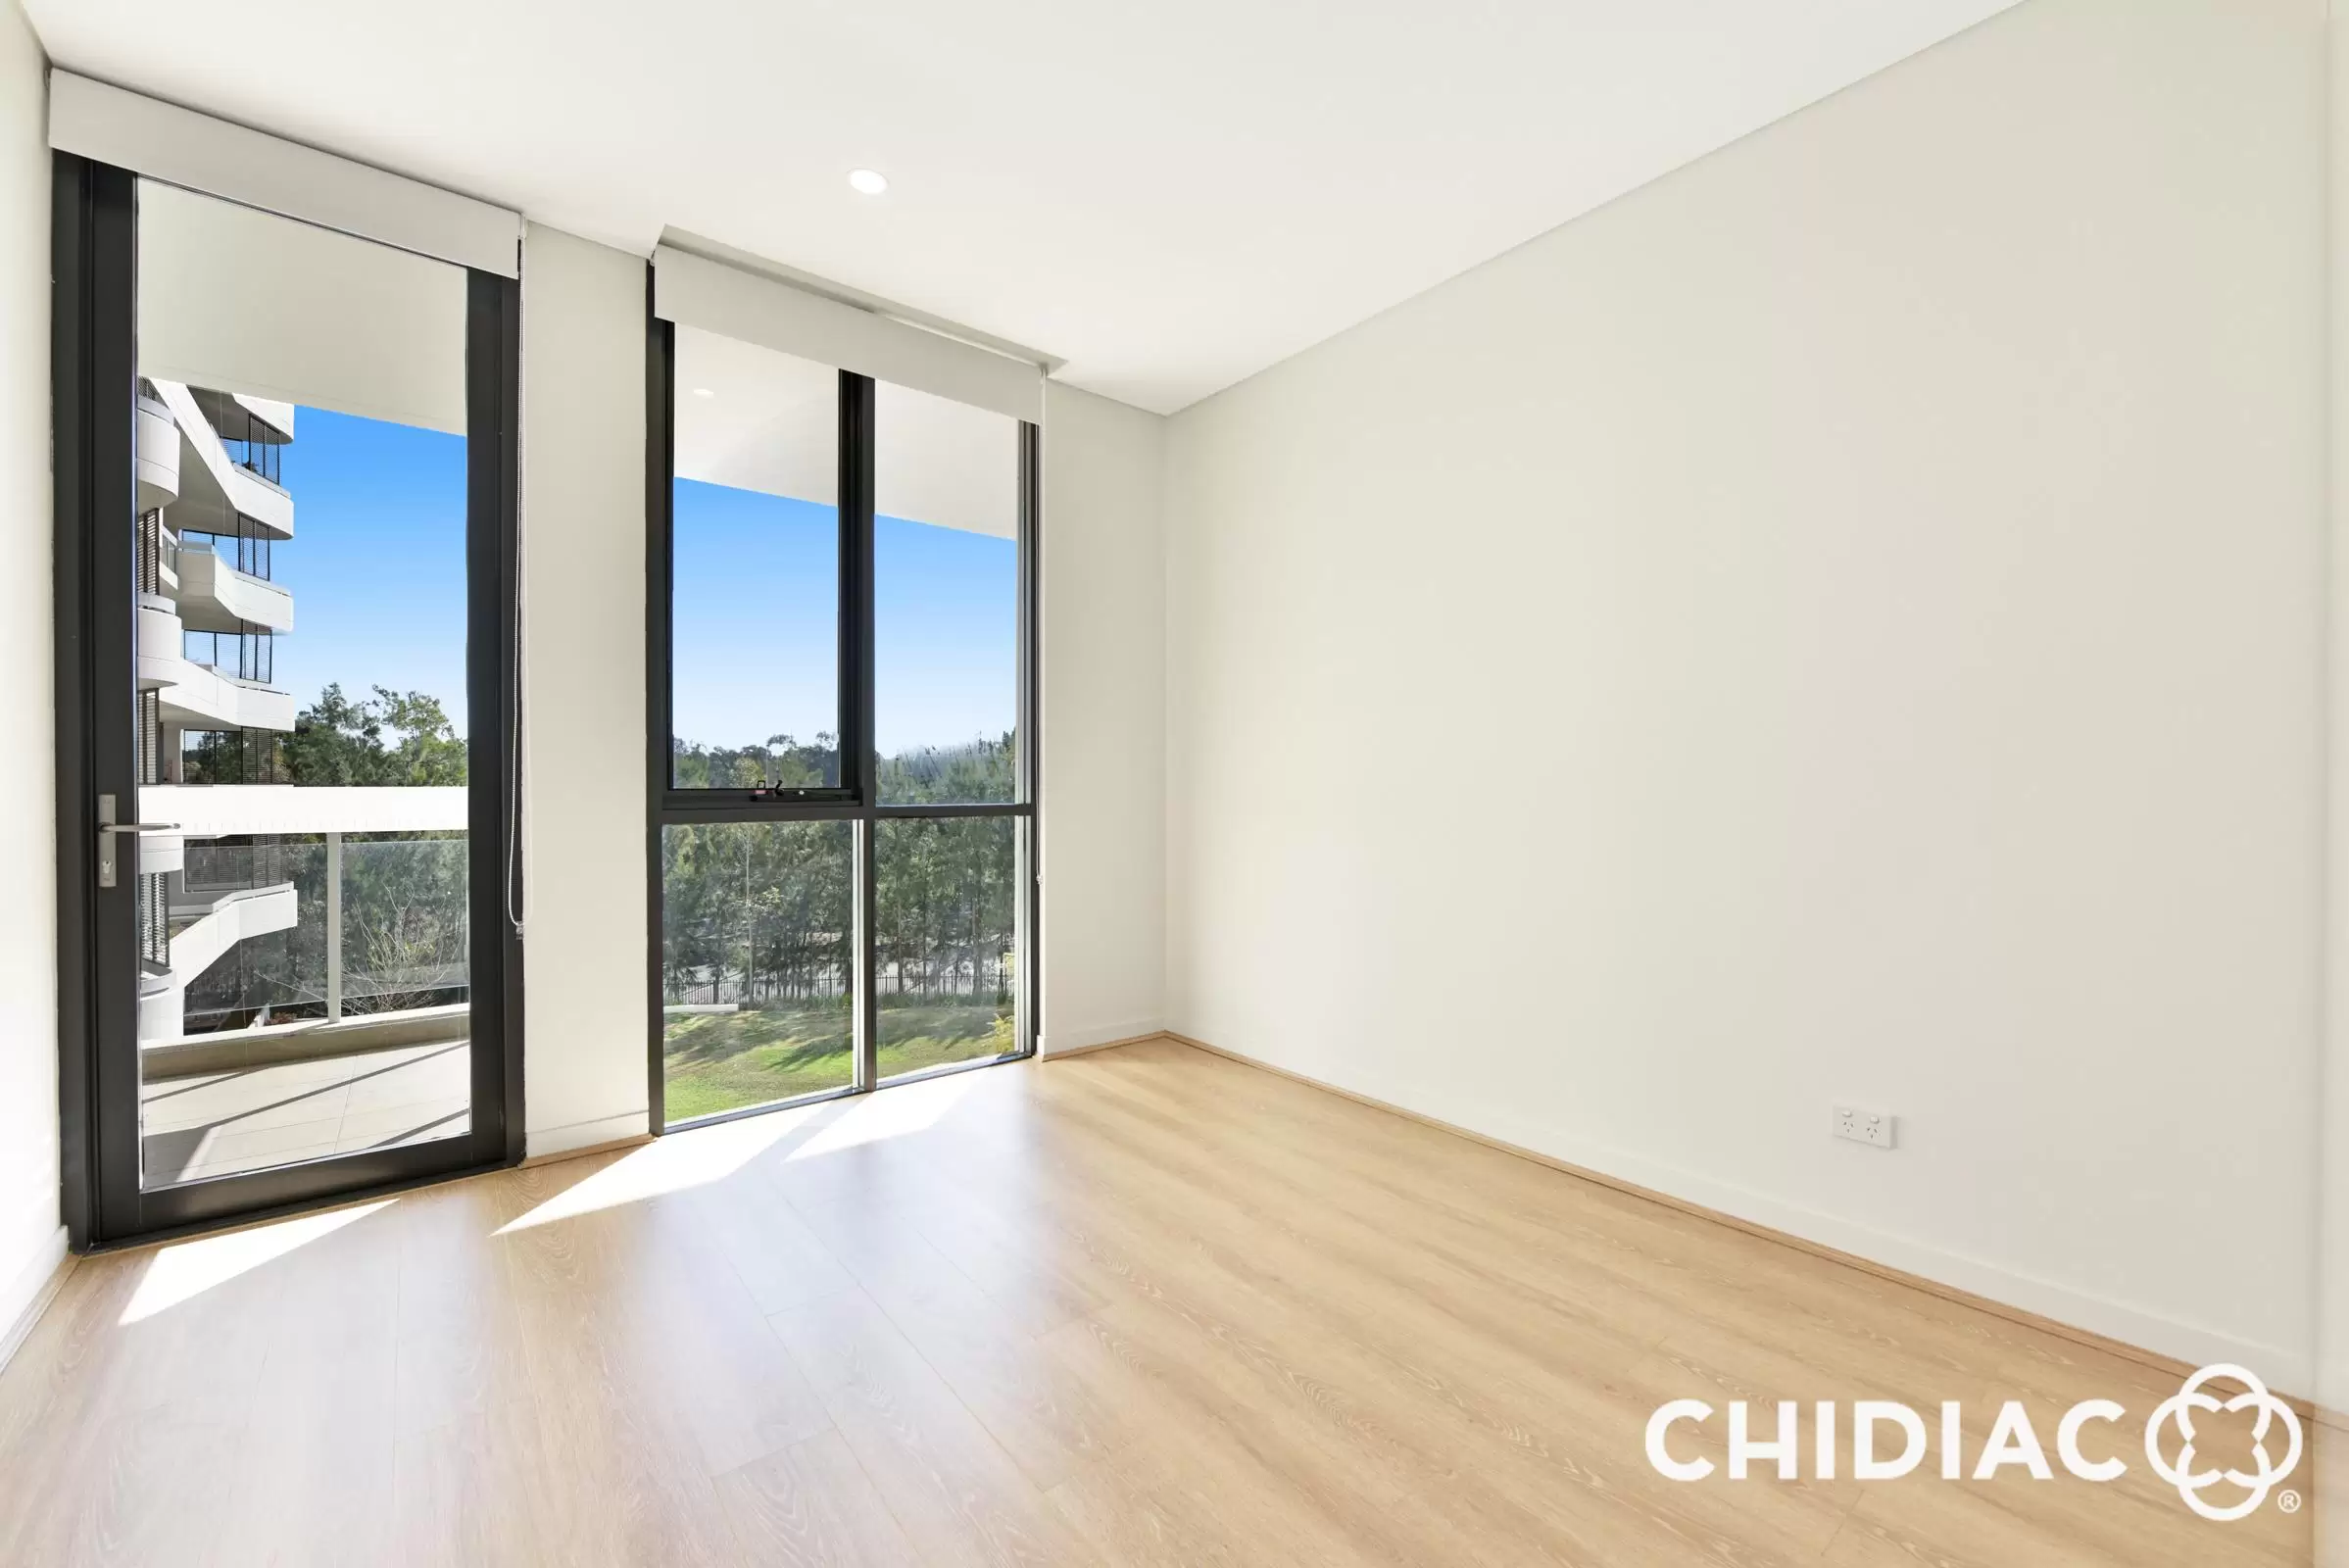 209/2 Kingfisher Street, Lidcombe Leased by Chidiac Realty - image 6